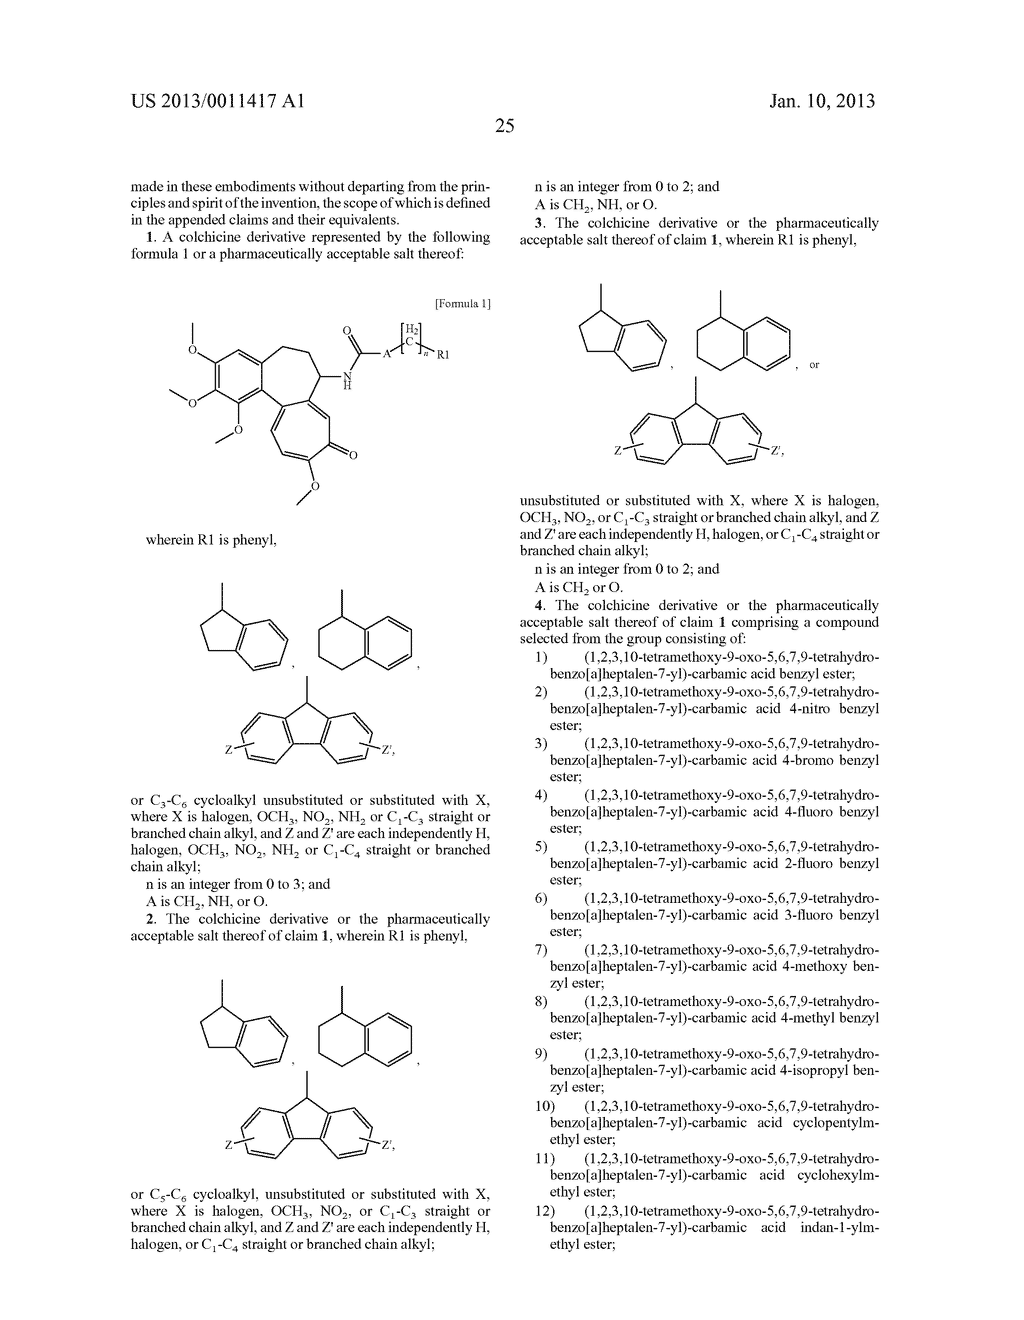 COLCHICINE DERIVATIVES OR PHARMACEUTICALLY ACCEPTABLE SALTS THEREOF,     METHOD FOR PREPARING SAID DERIVATIVES, AND PHARMACEUTICAL COMPOSITION     COMPRISING SAID DERIVATIVES - diagram, schematic, and image 28